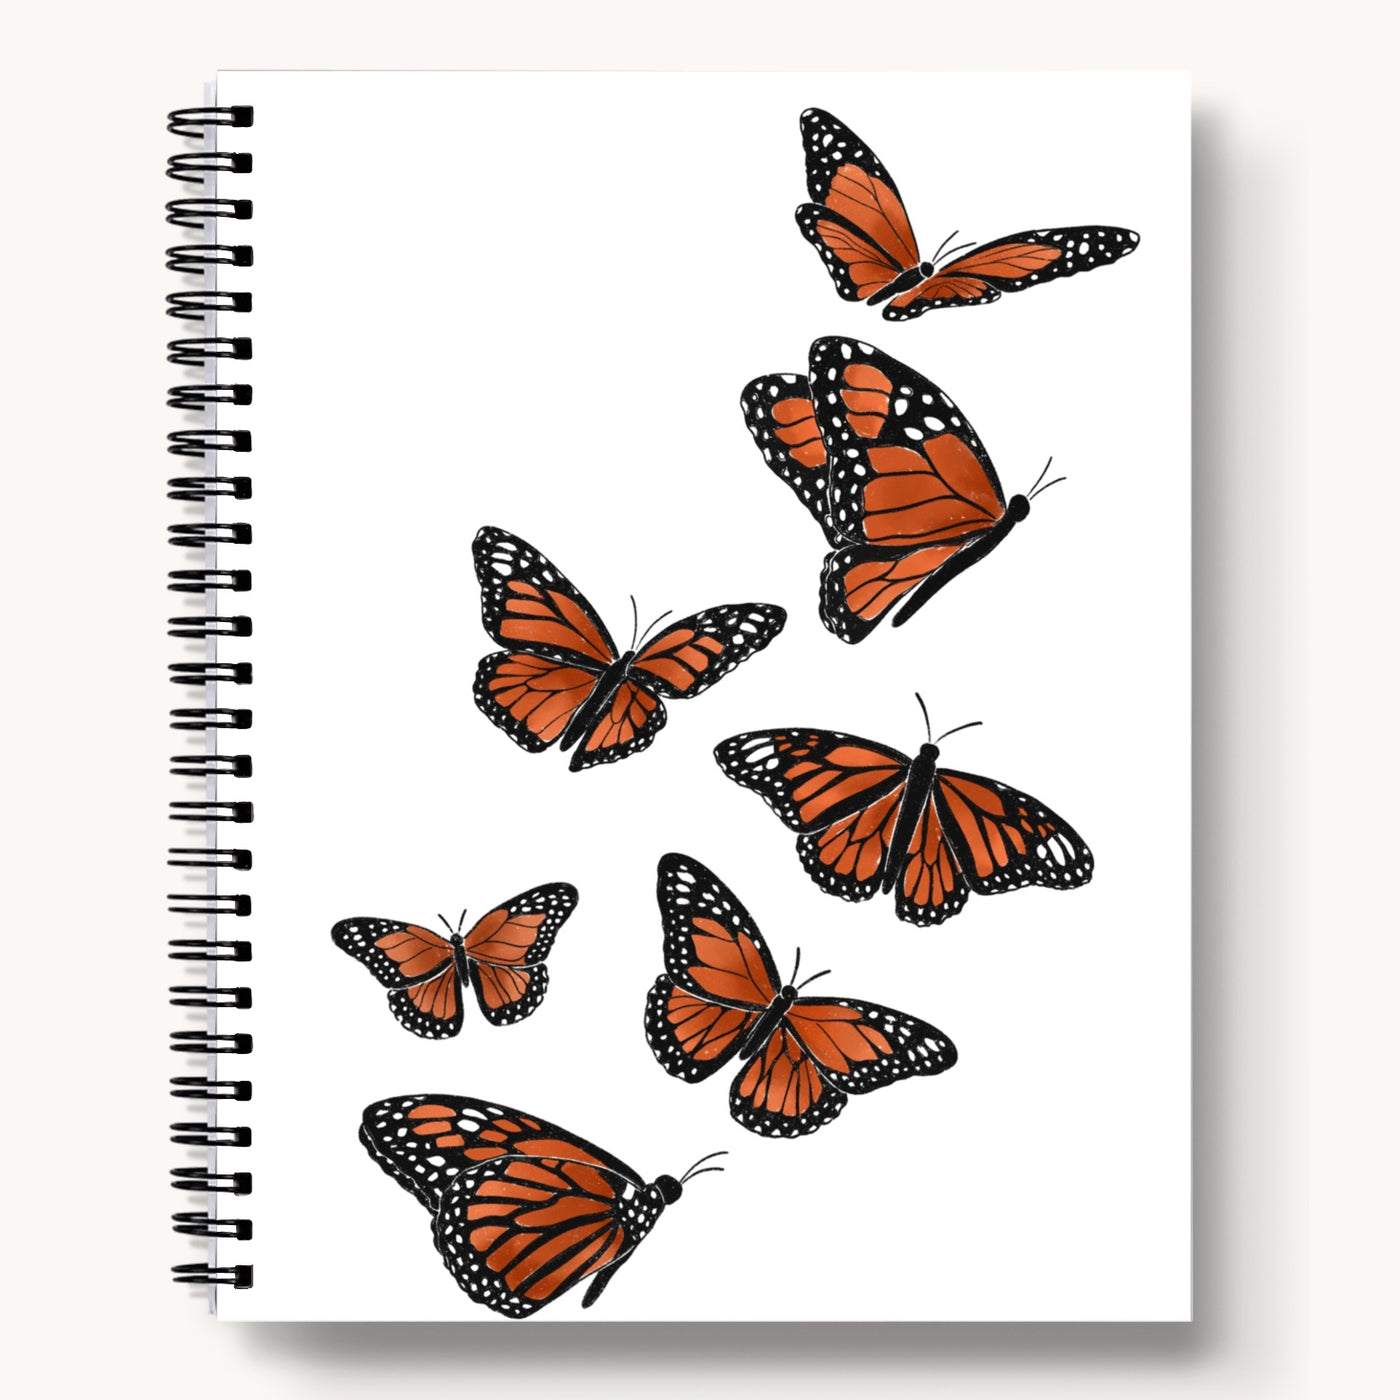 Spiral Lined Notebook